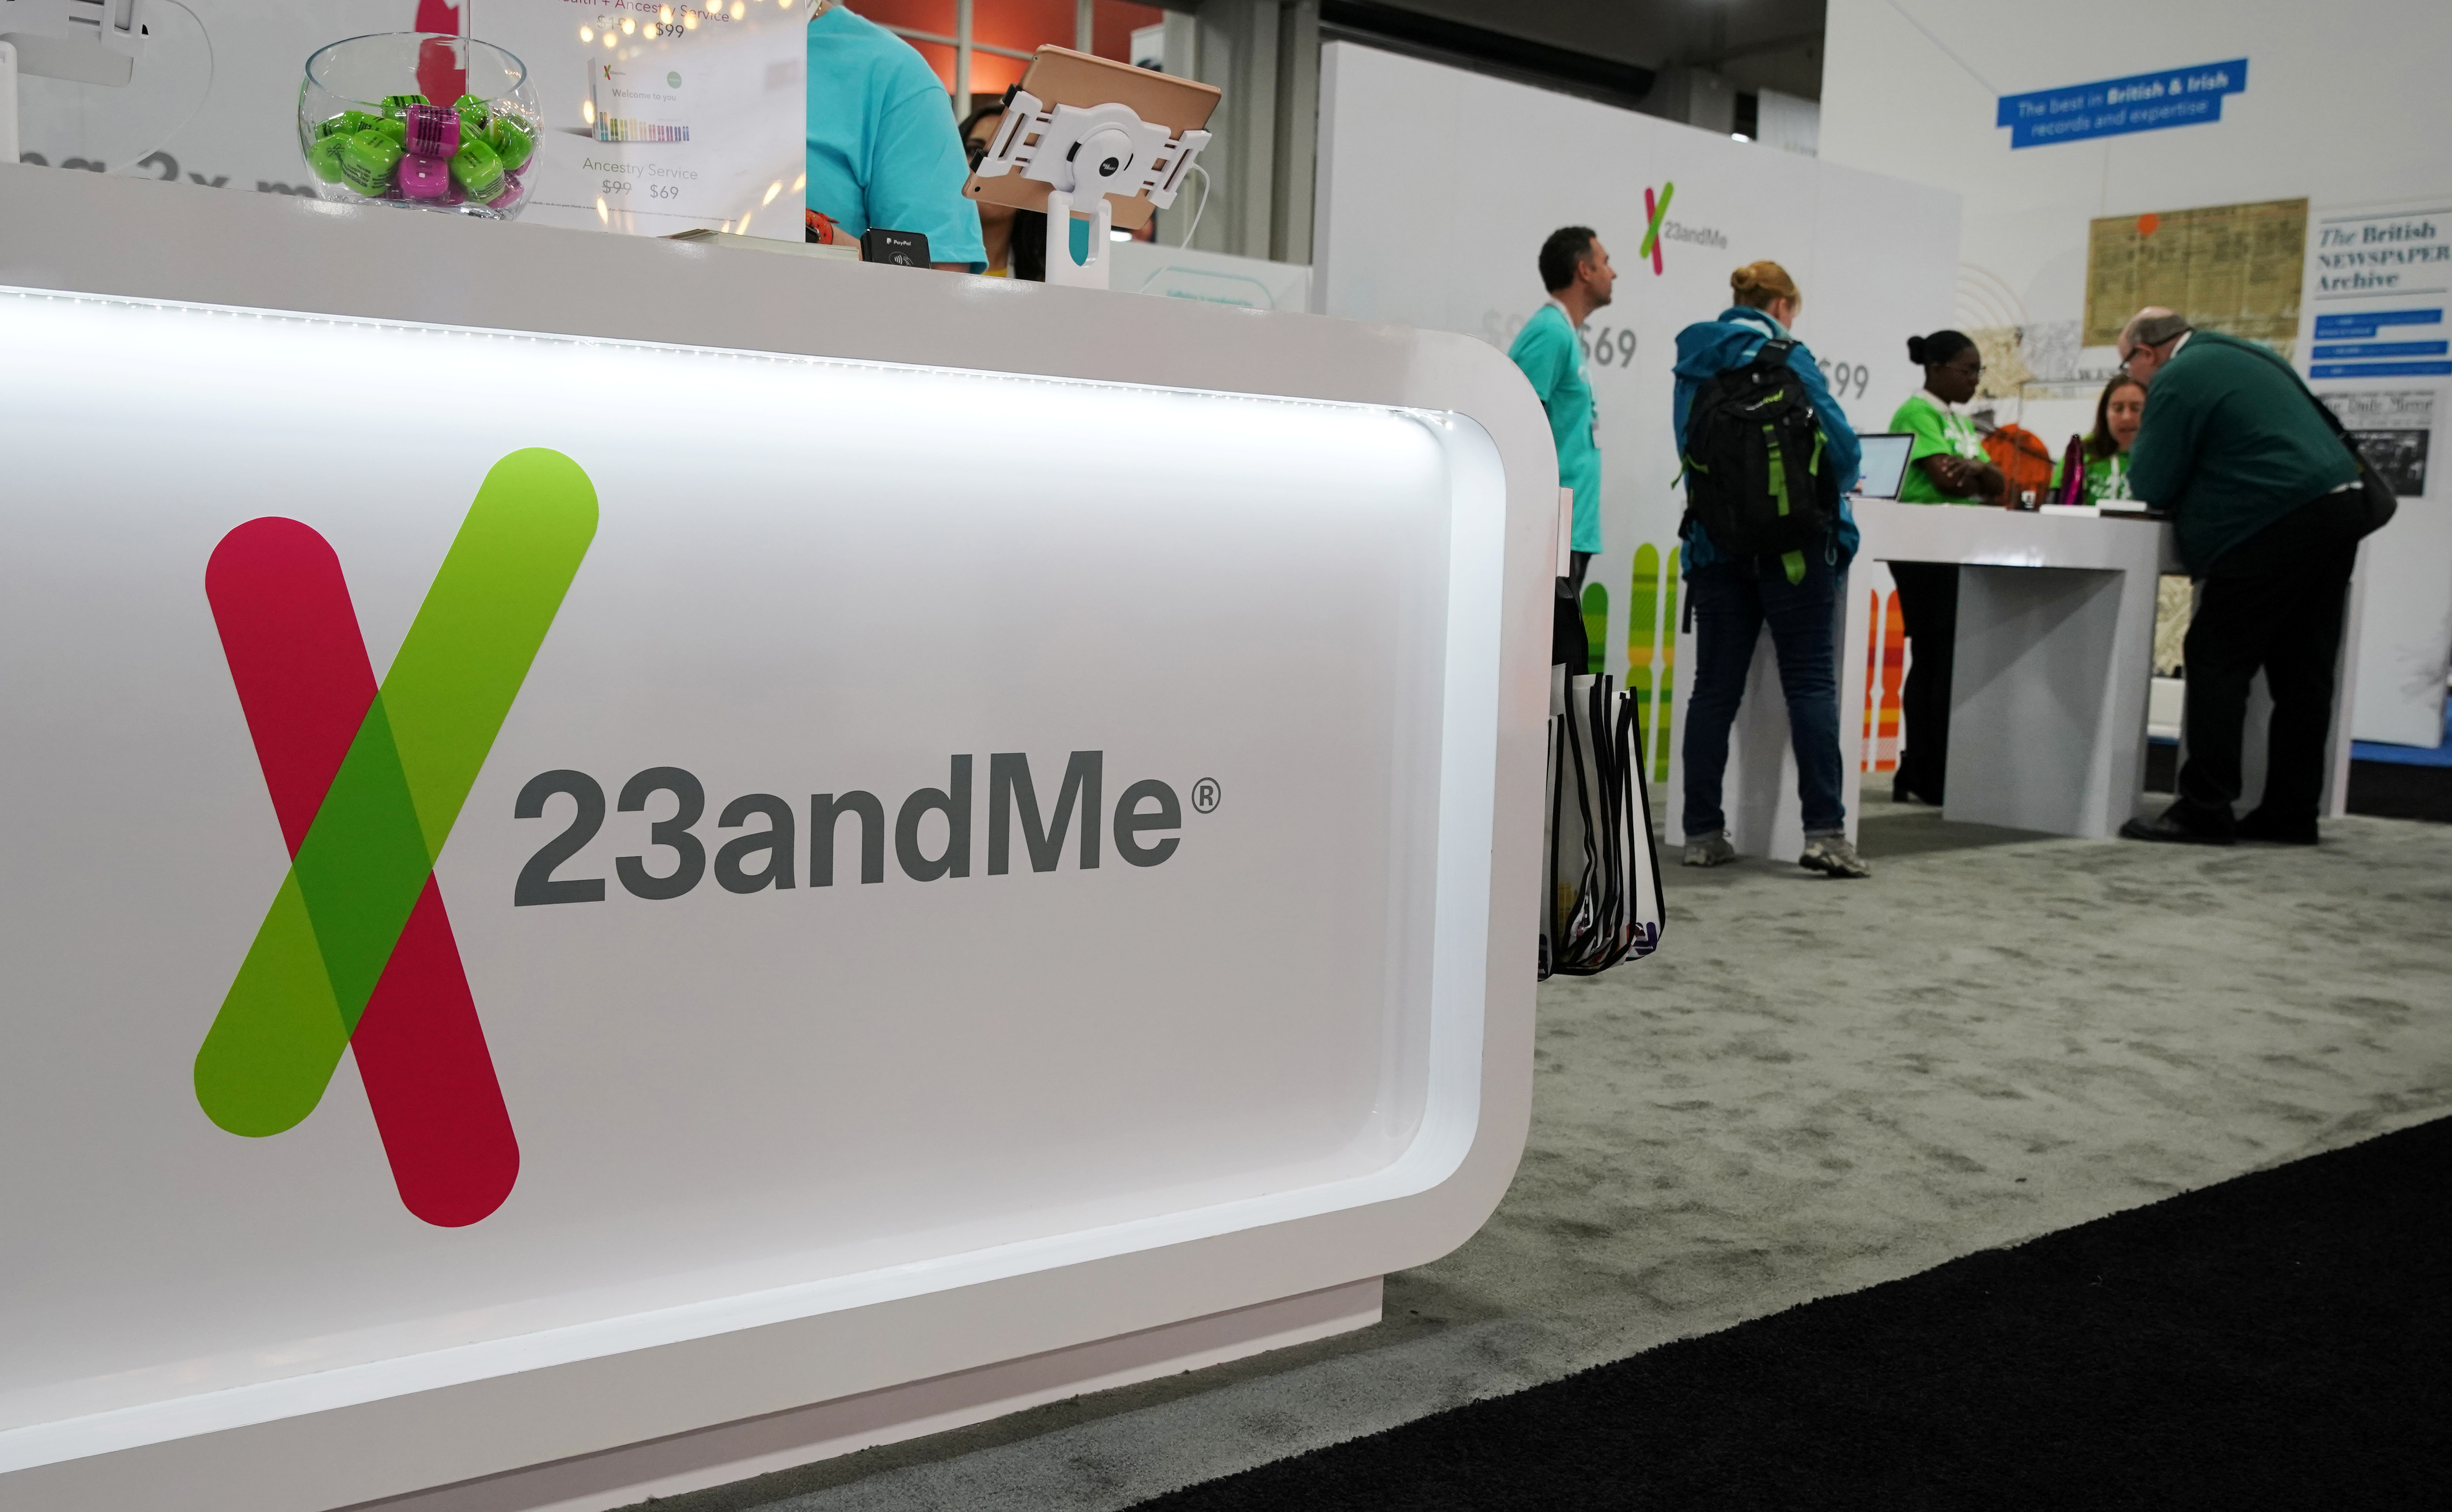 Attendees visit the 23andMe booth at the RootsTech annual genealogical event in Salt Lake City